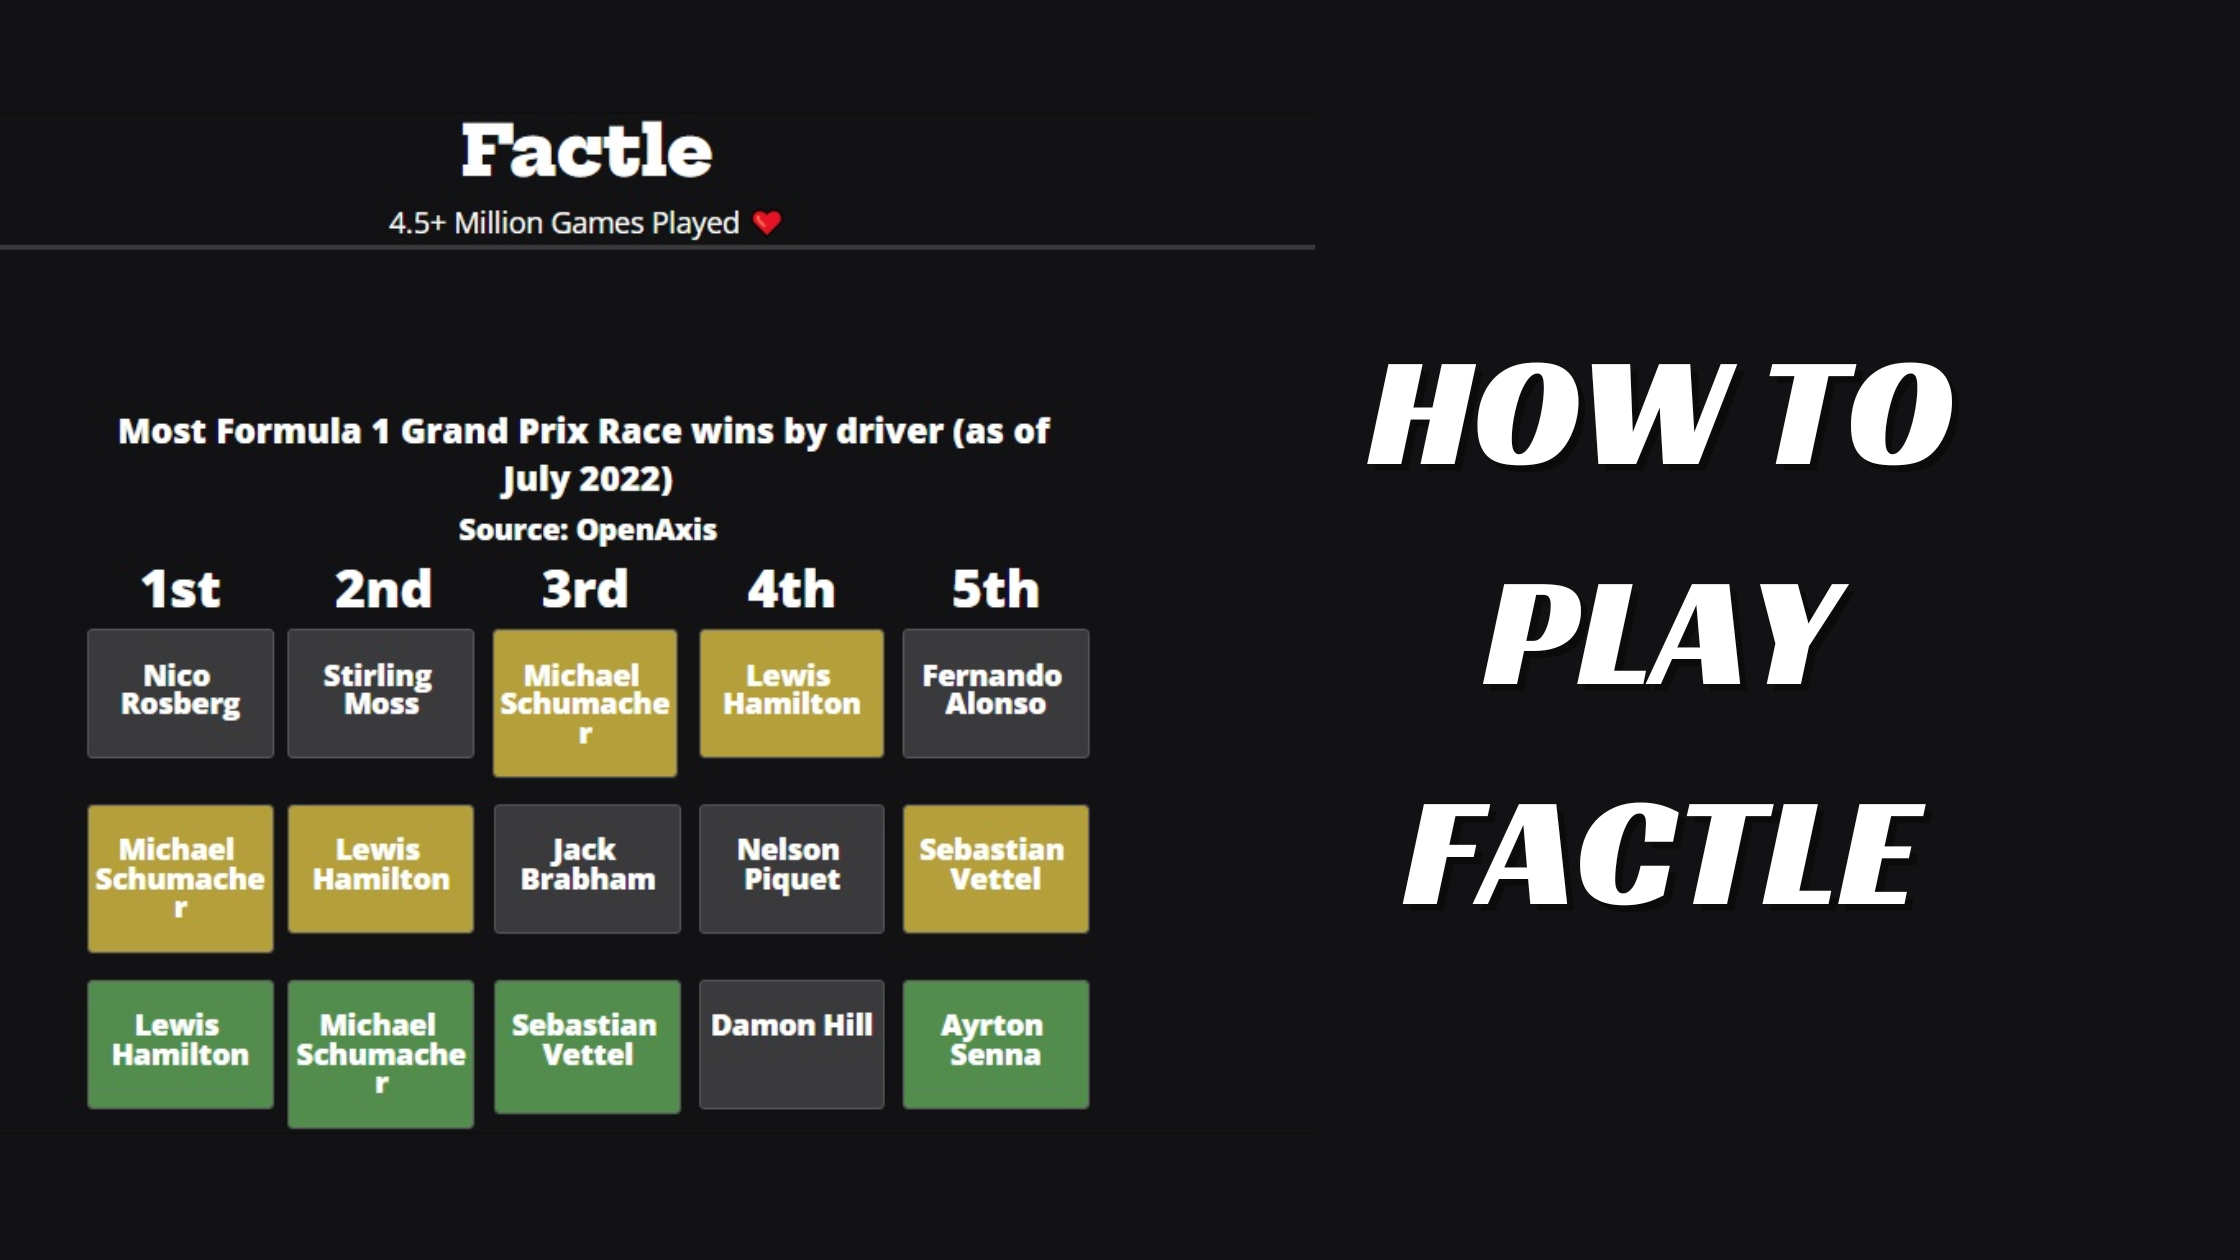 How Factle Became a Huge Hit: The Story Behind the Hype